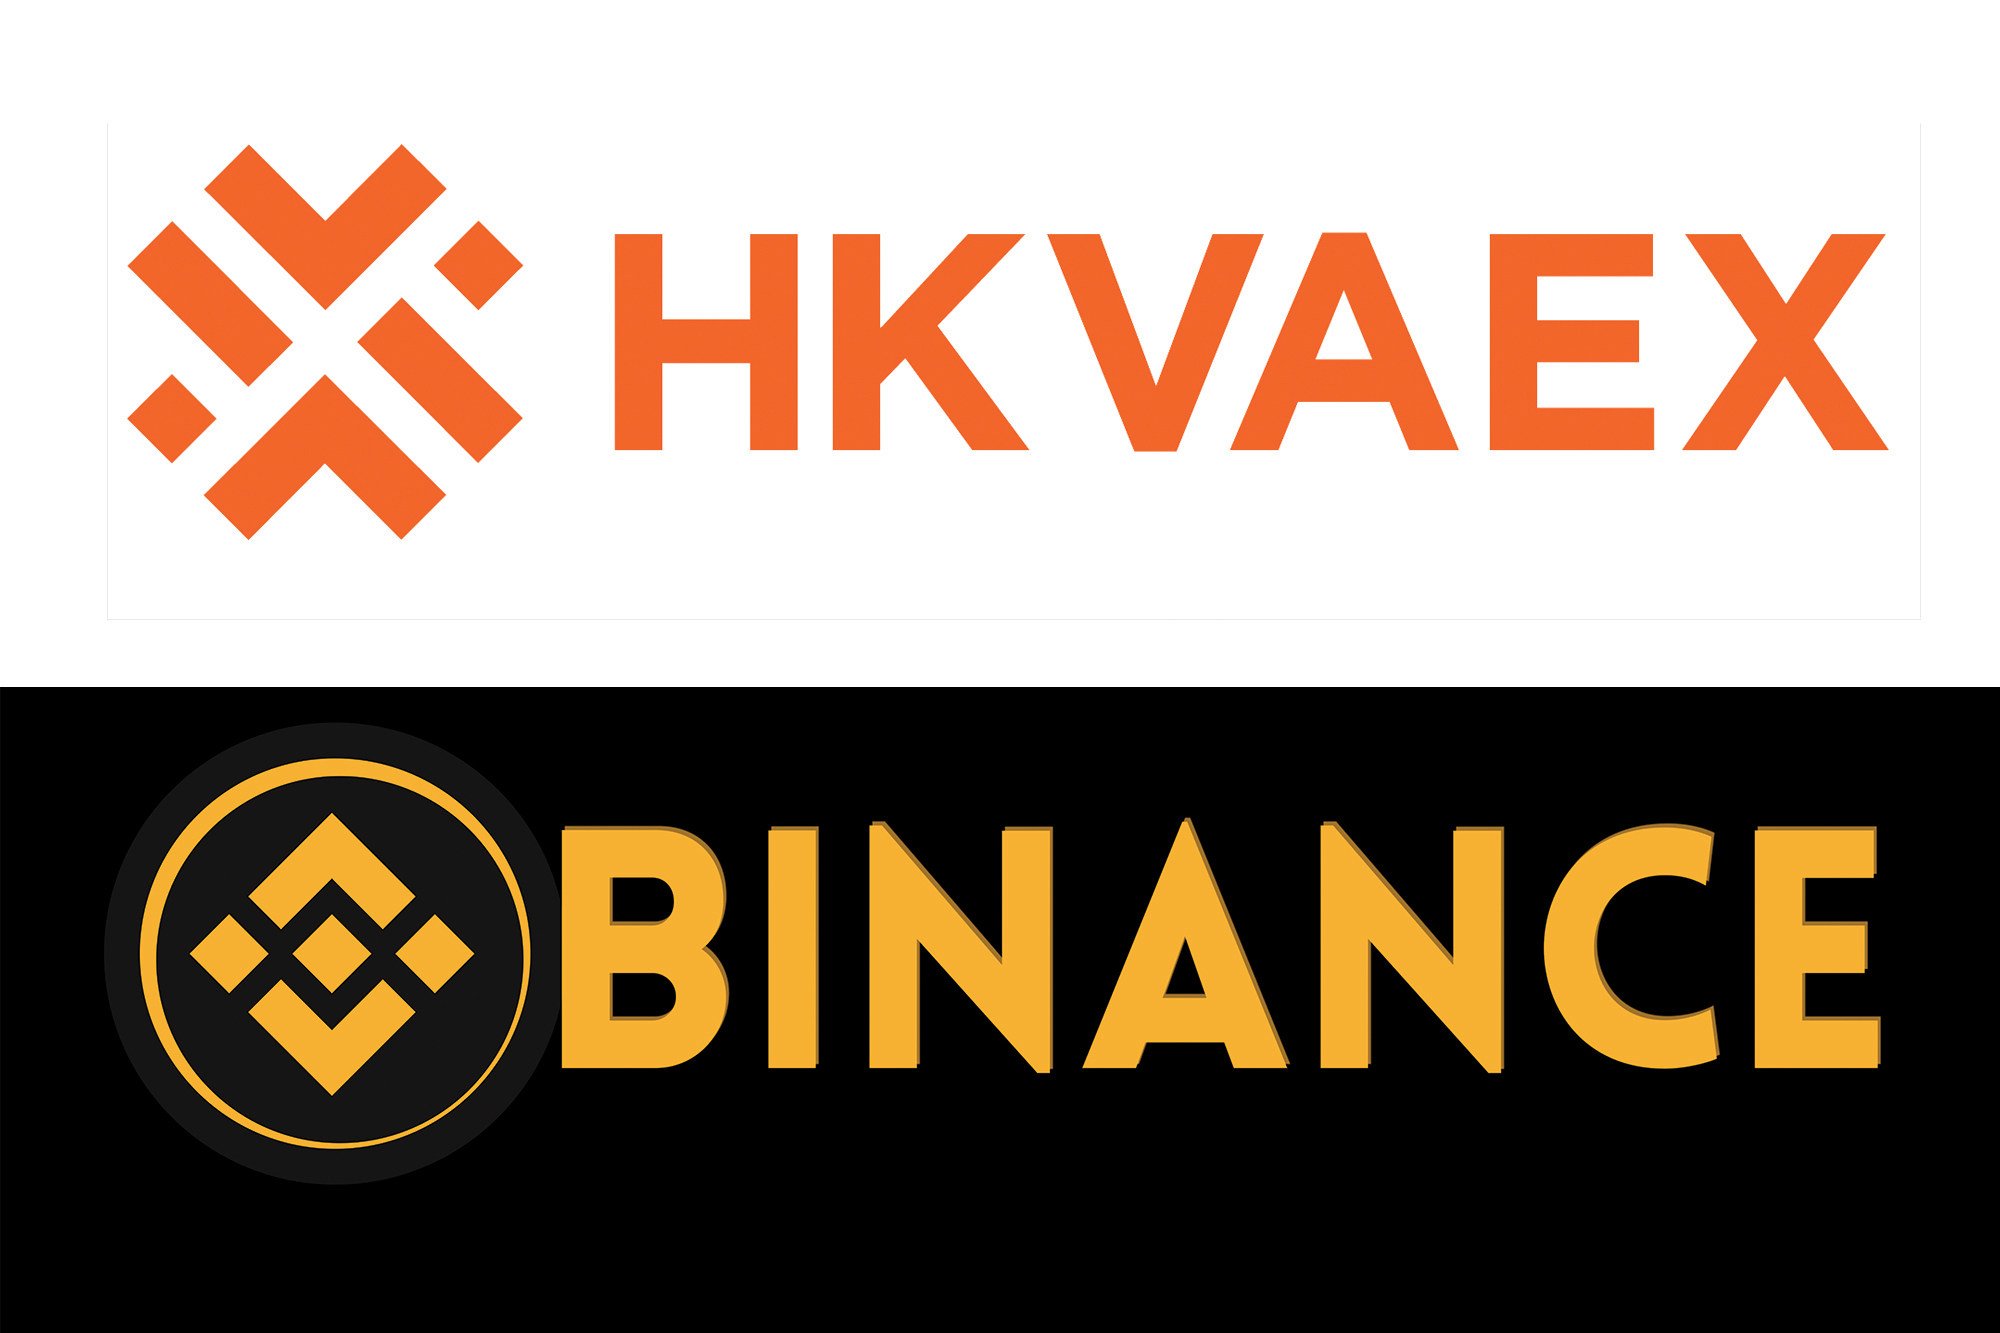 The HKVAEX and Binance logos. Photo: Handout